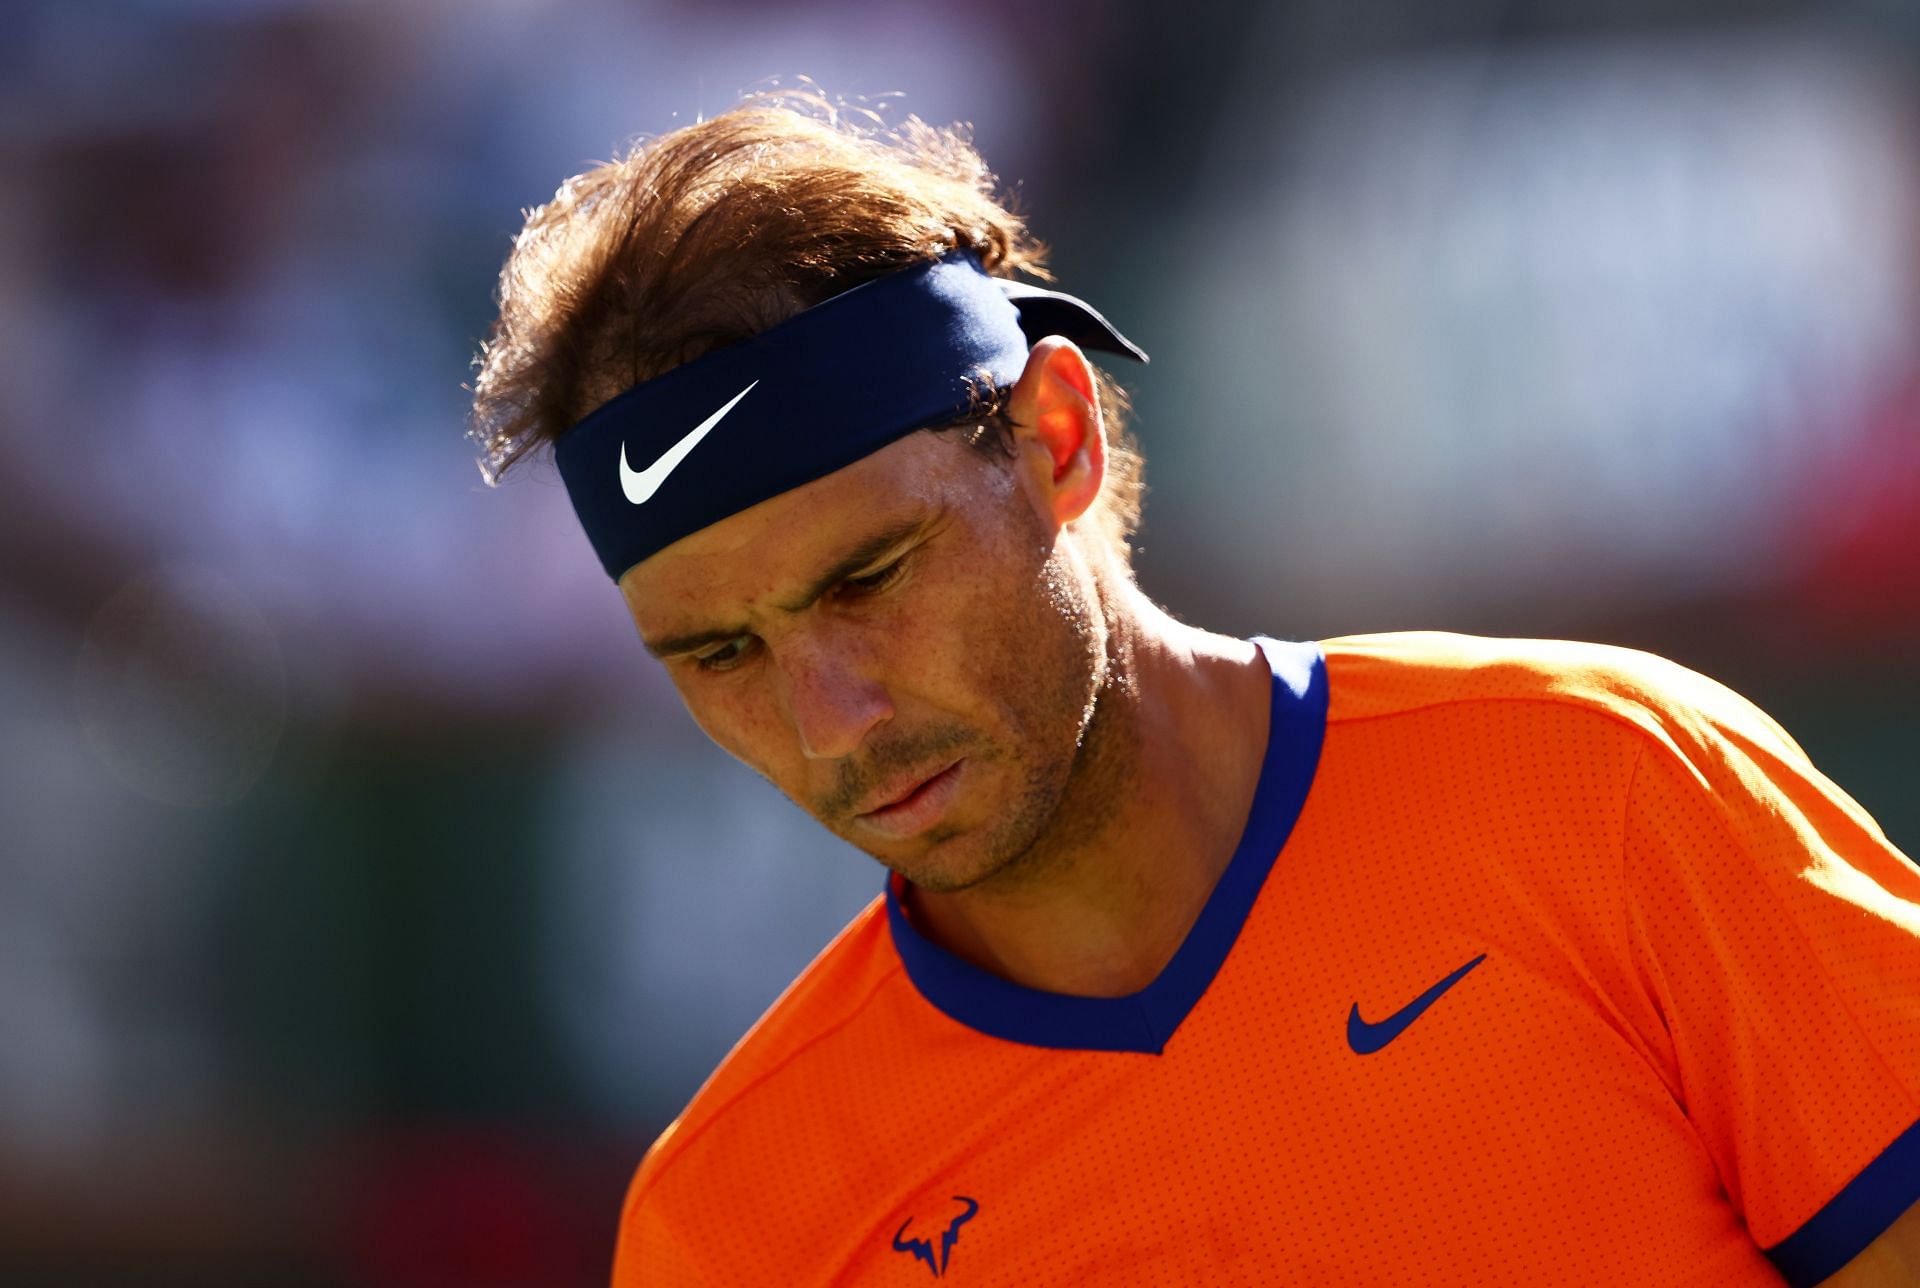 Rafael Nadal will be out of action for some time